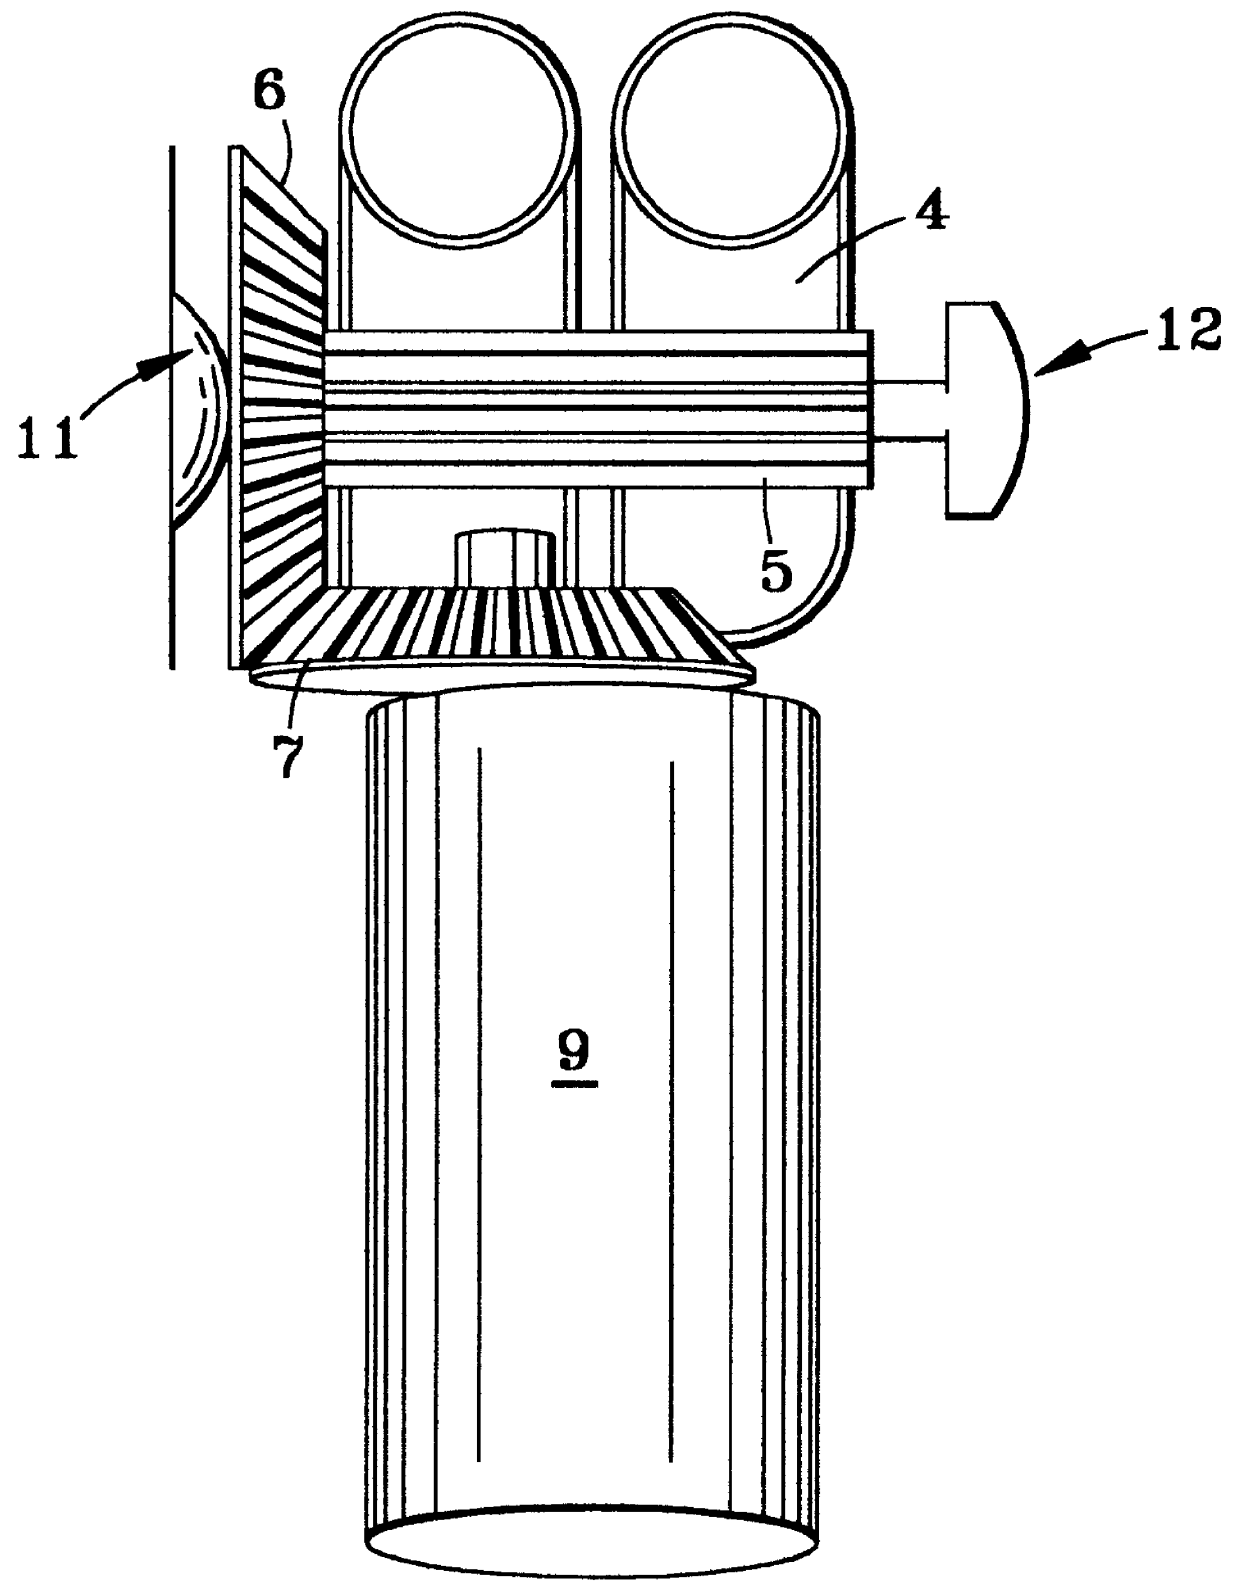 Electrically powered fluid-dispersing apparatus and a method particularly adapted for hand gun operation